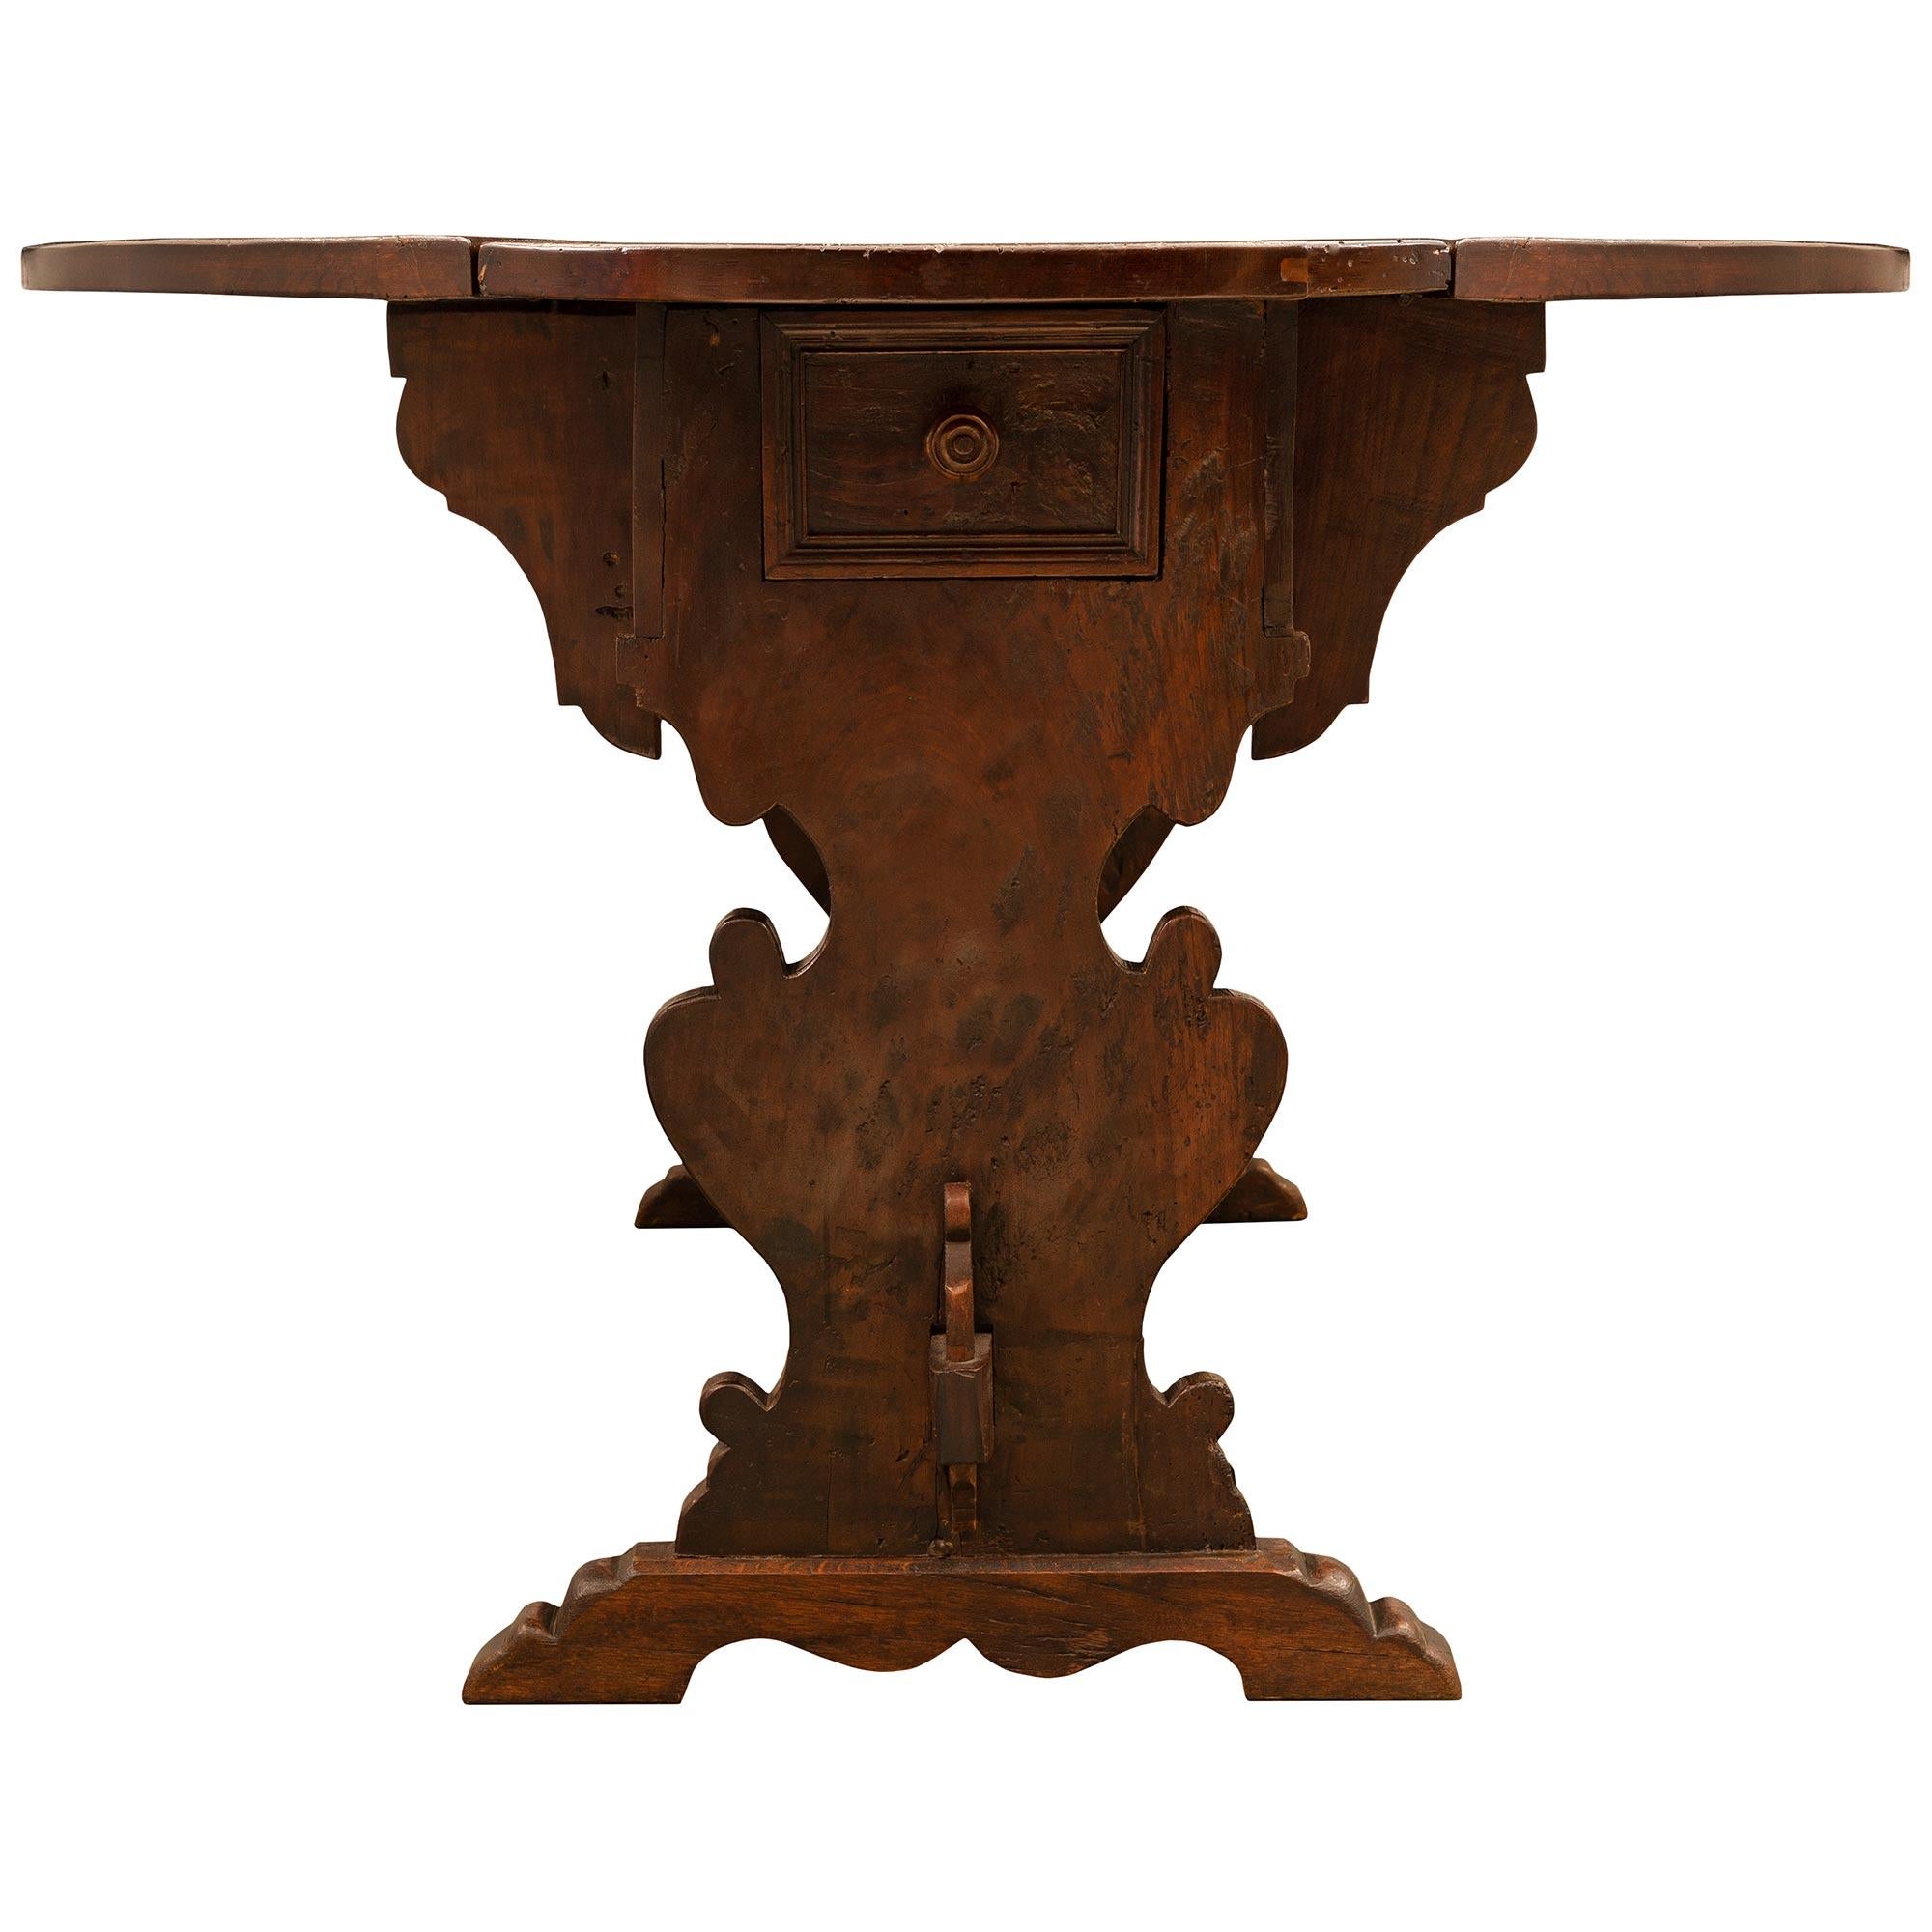 Italian 18th Century Solid Walnut Gateleg Table from Tuscany For Sale 2